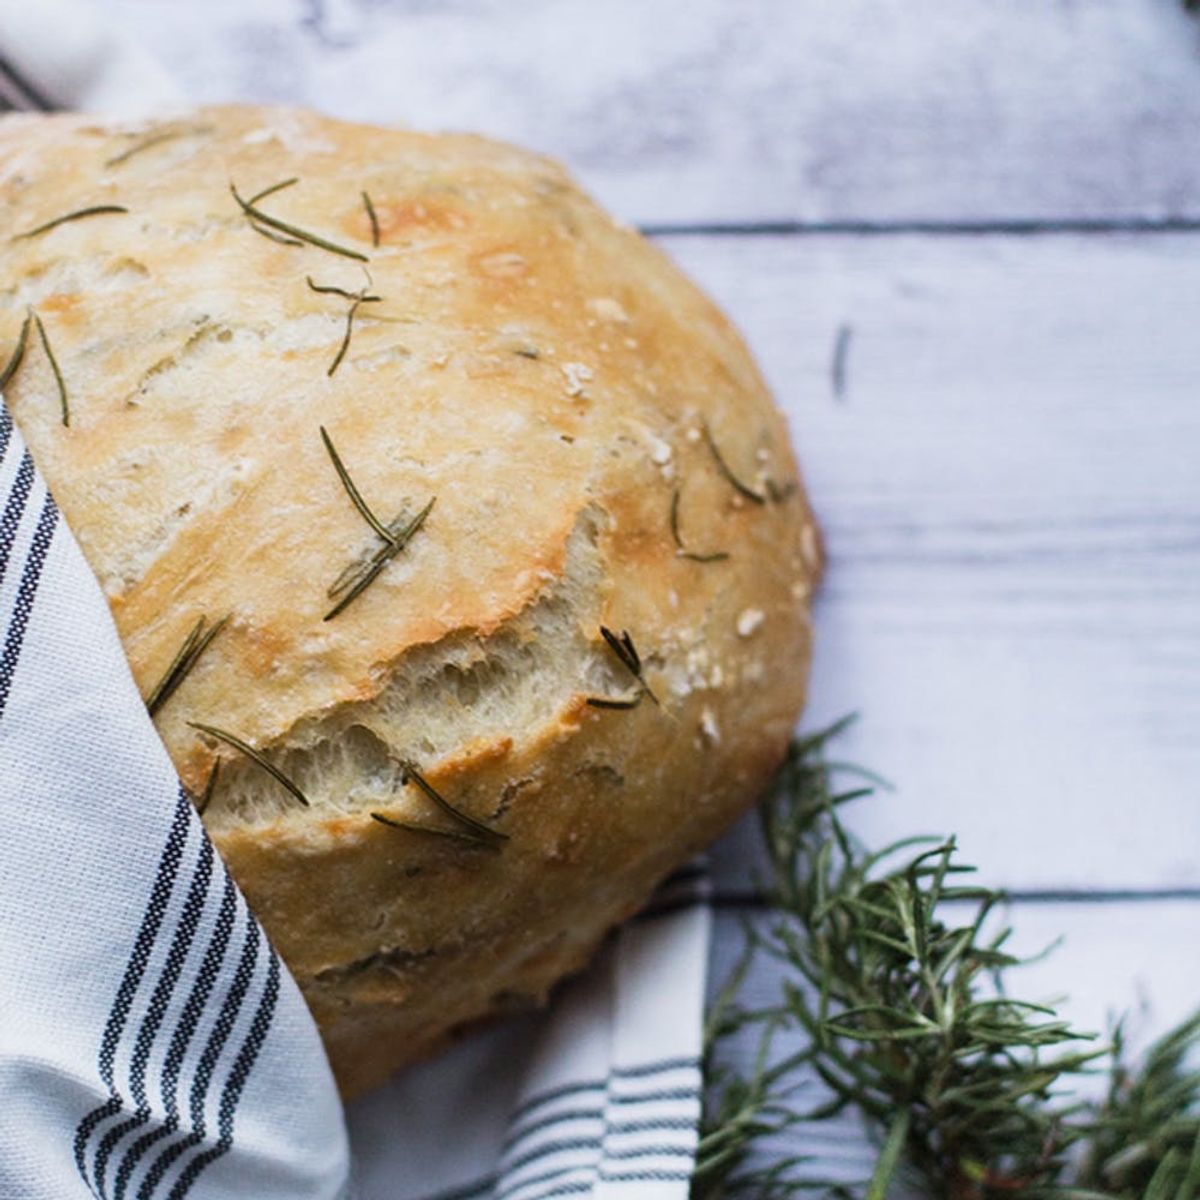 This No-Knead, 5-Ingredient Artisanal Bread Is Super Easy to Bake